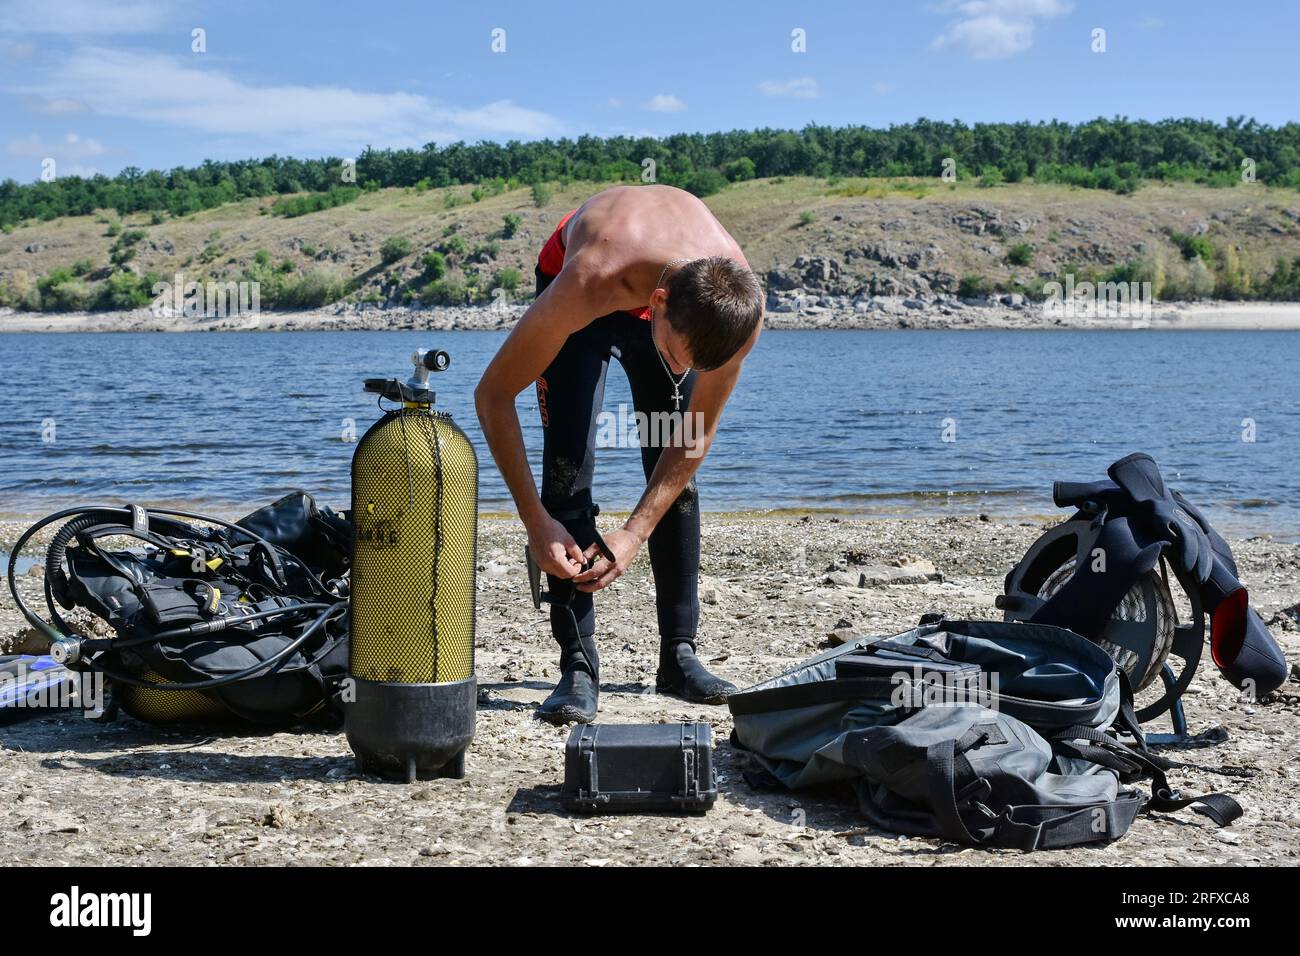 A Ukrainian sapper seen preparing for inspection during the demining of a Dnipro river in Zaporizhzhia. Ukraine’s international partners will give it over US$244 million for humanitarian mine clearance. Source: Yuliia Svyrydenko, First Deputy Prime Minister and Minister of Economic Development and Trade of Ukraine. Ukraine will also receive individual mine clearance kits, explosive protective suits, quadcopters, and robotic systems for the disposal of ammunition. Stock Photo